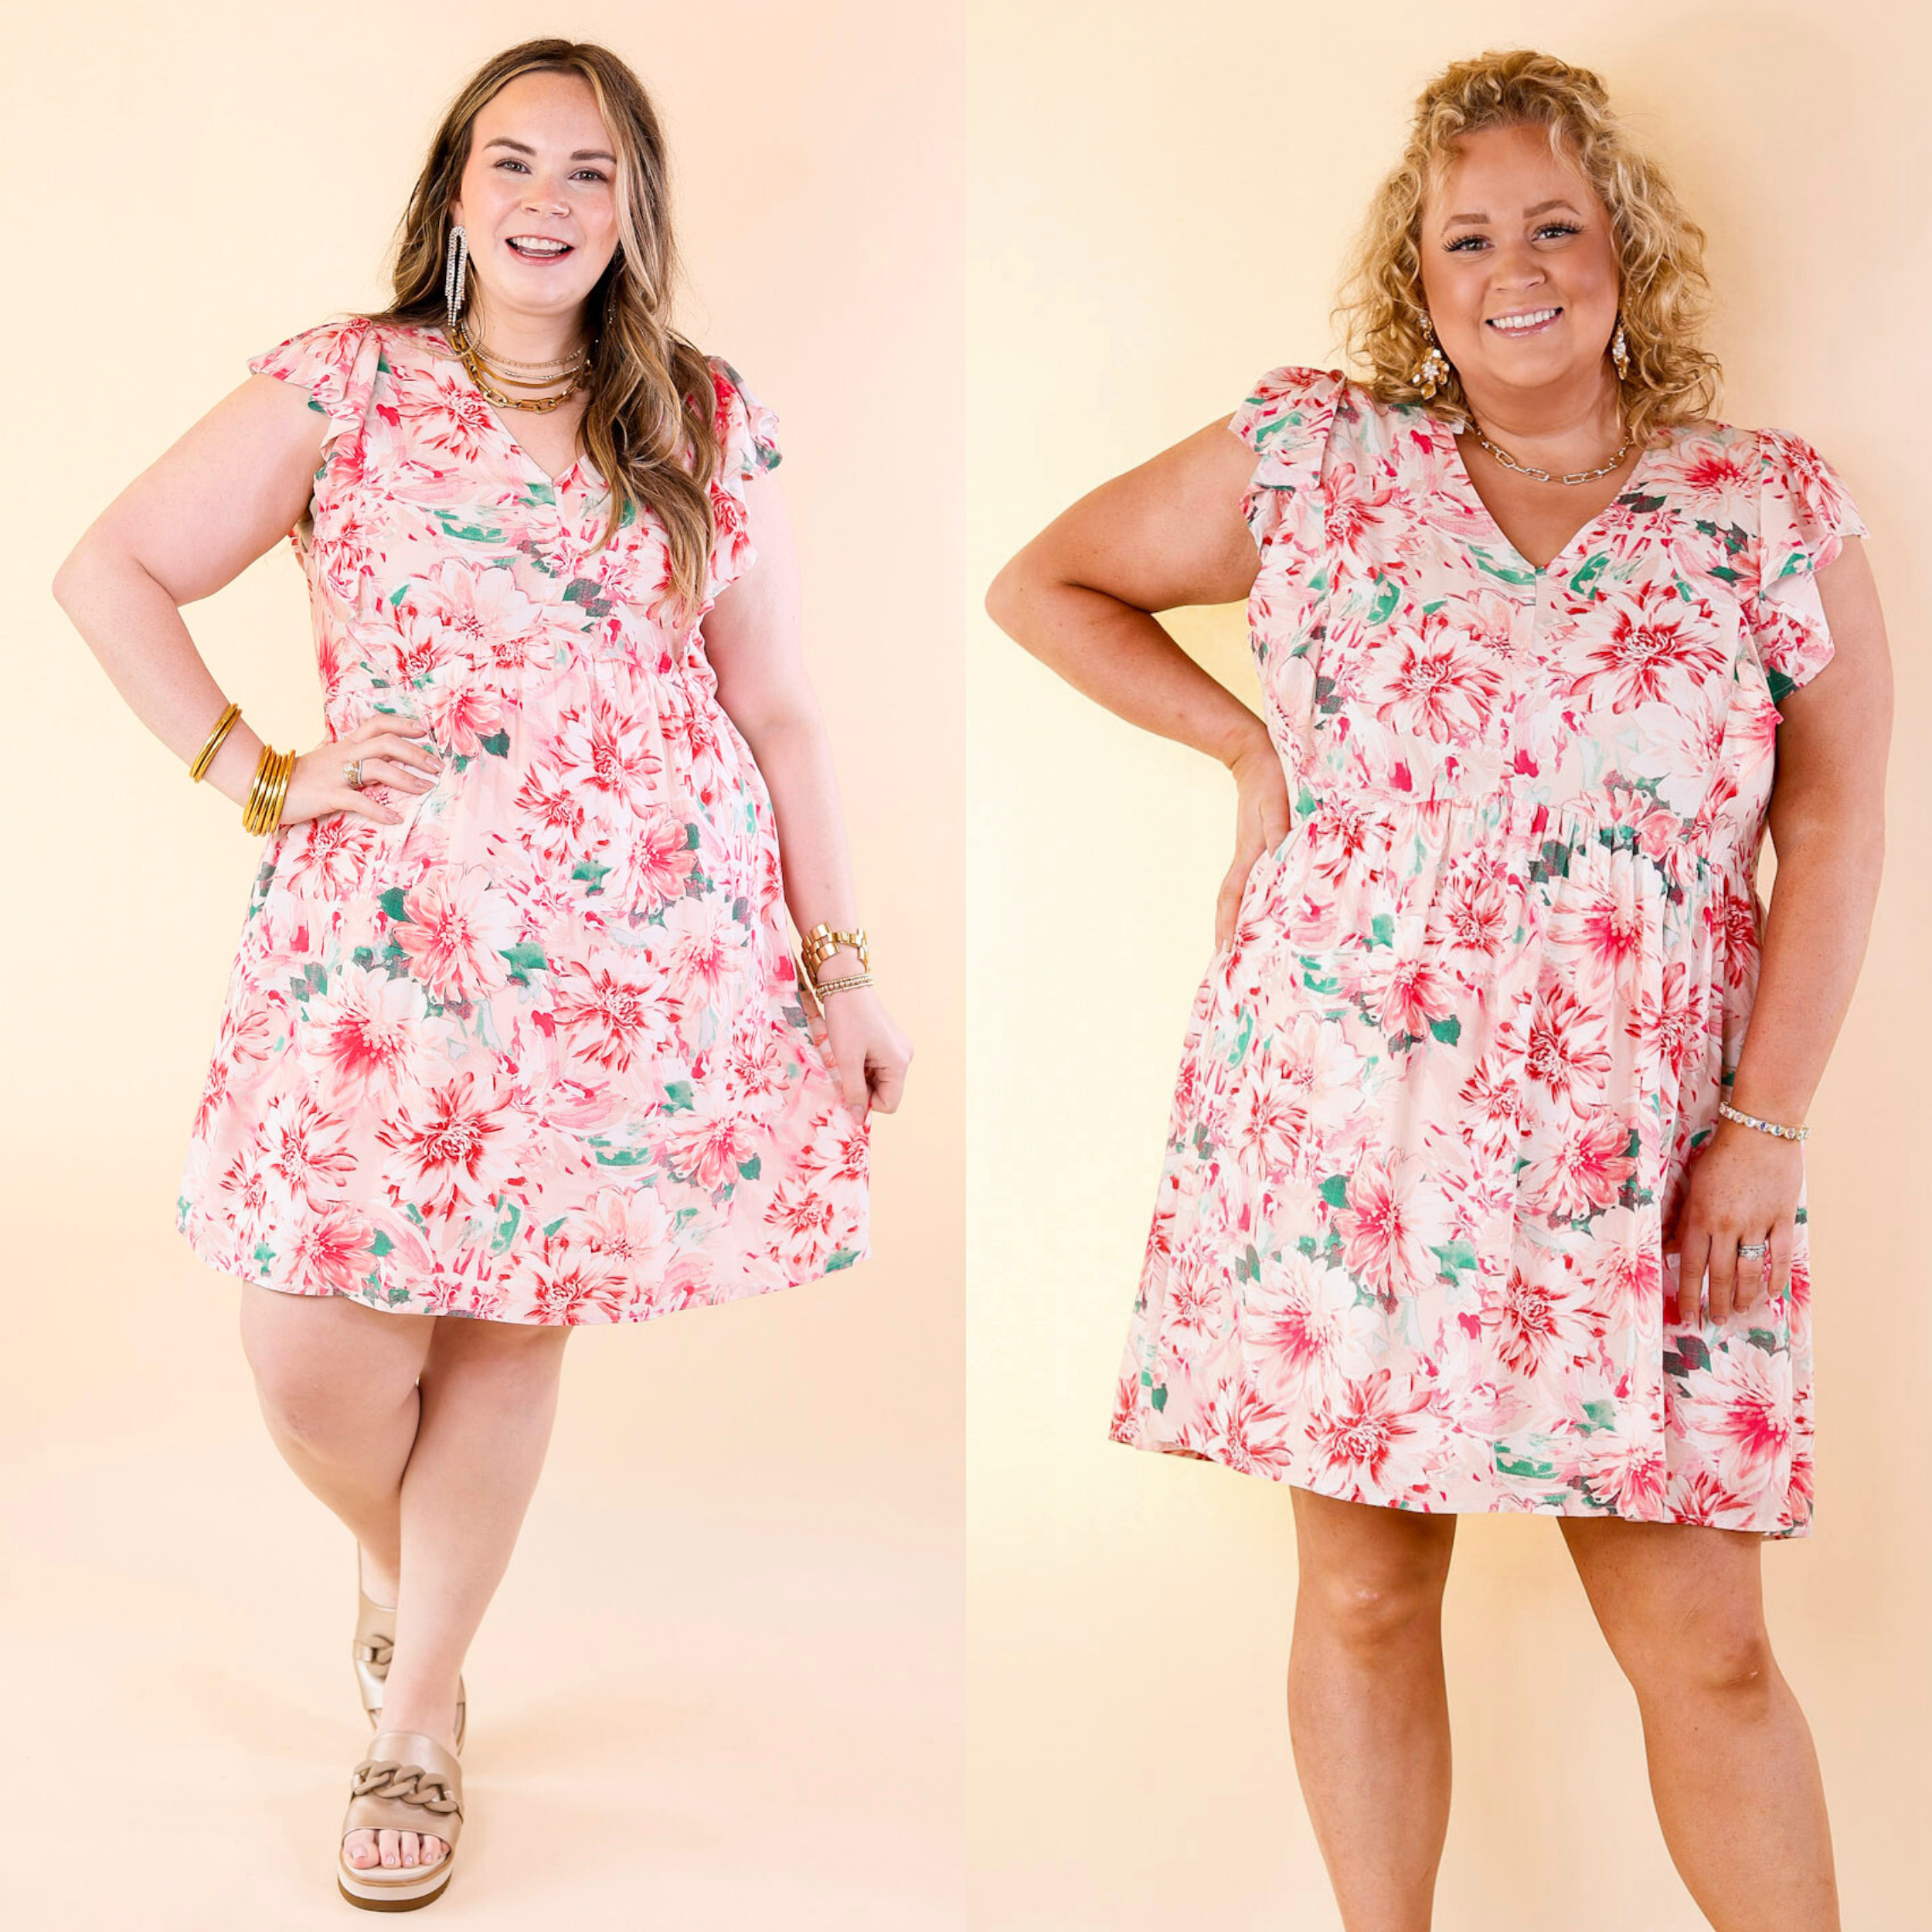 Sunshine On My Mind Floral Ruffle Cap Sleeve Dress in Pink - Giddy Up Glamour Boutique